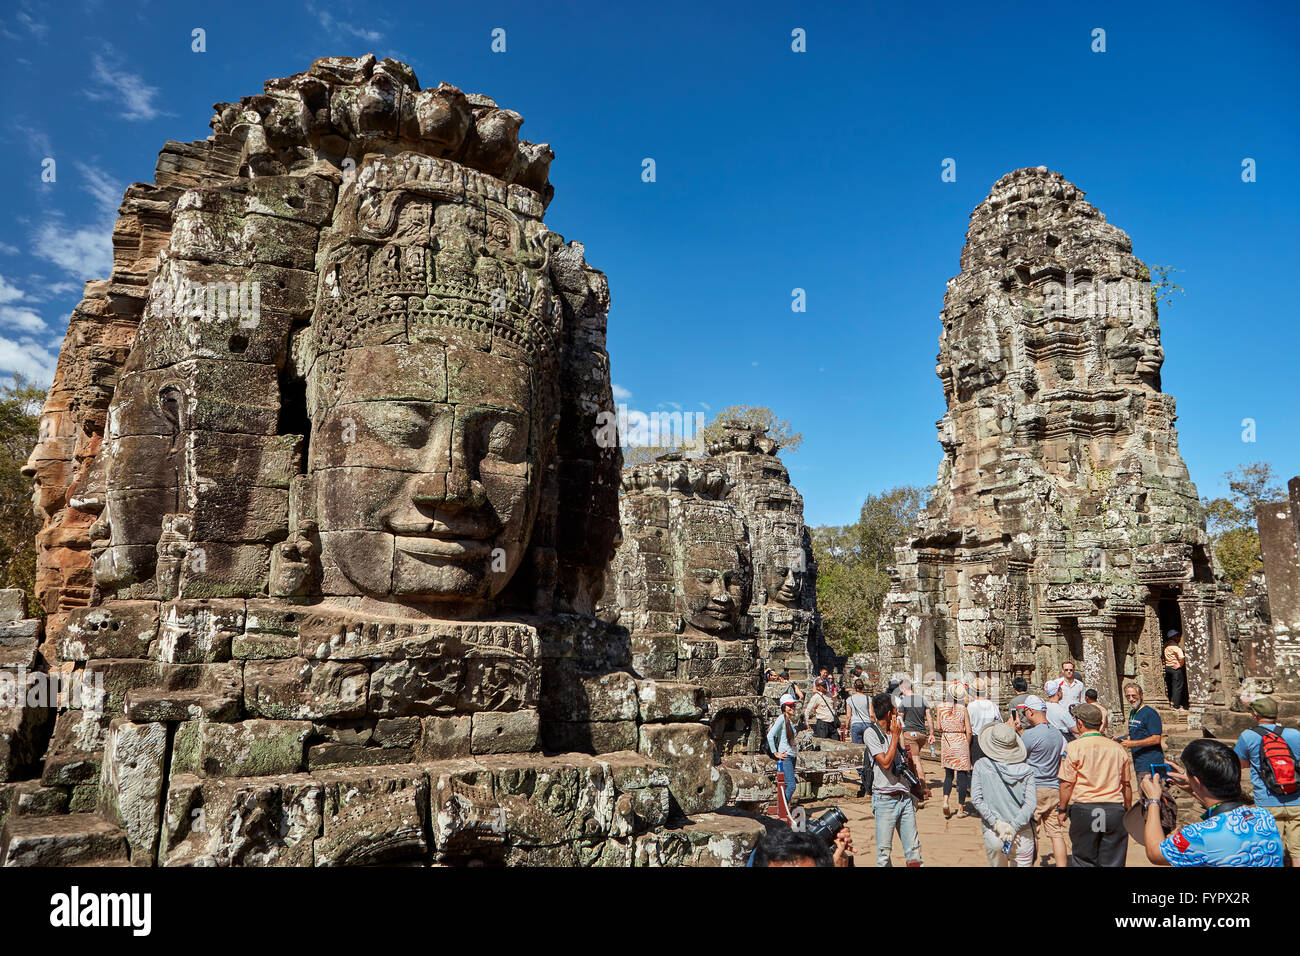 Faces and tourists, Bayon temple ruins, Angkor Thom (12th century temple) Angkor World Heritage Site, Siem Reap, Cambodia Stock Photo